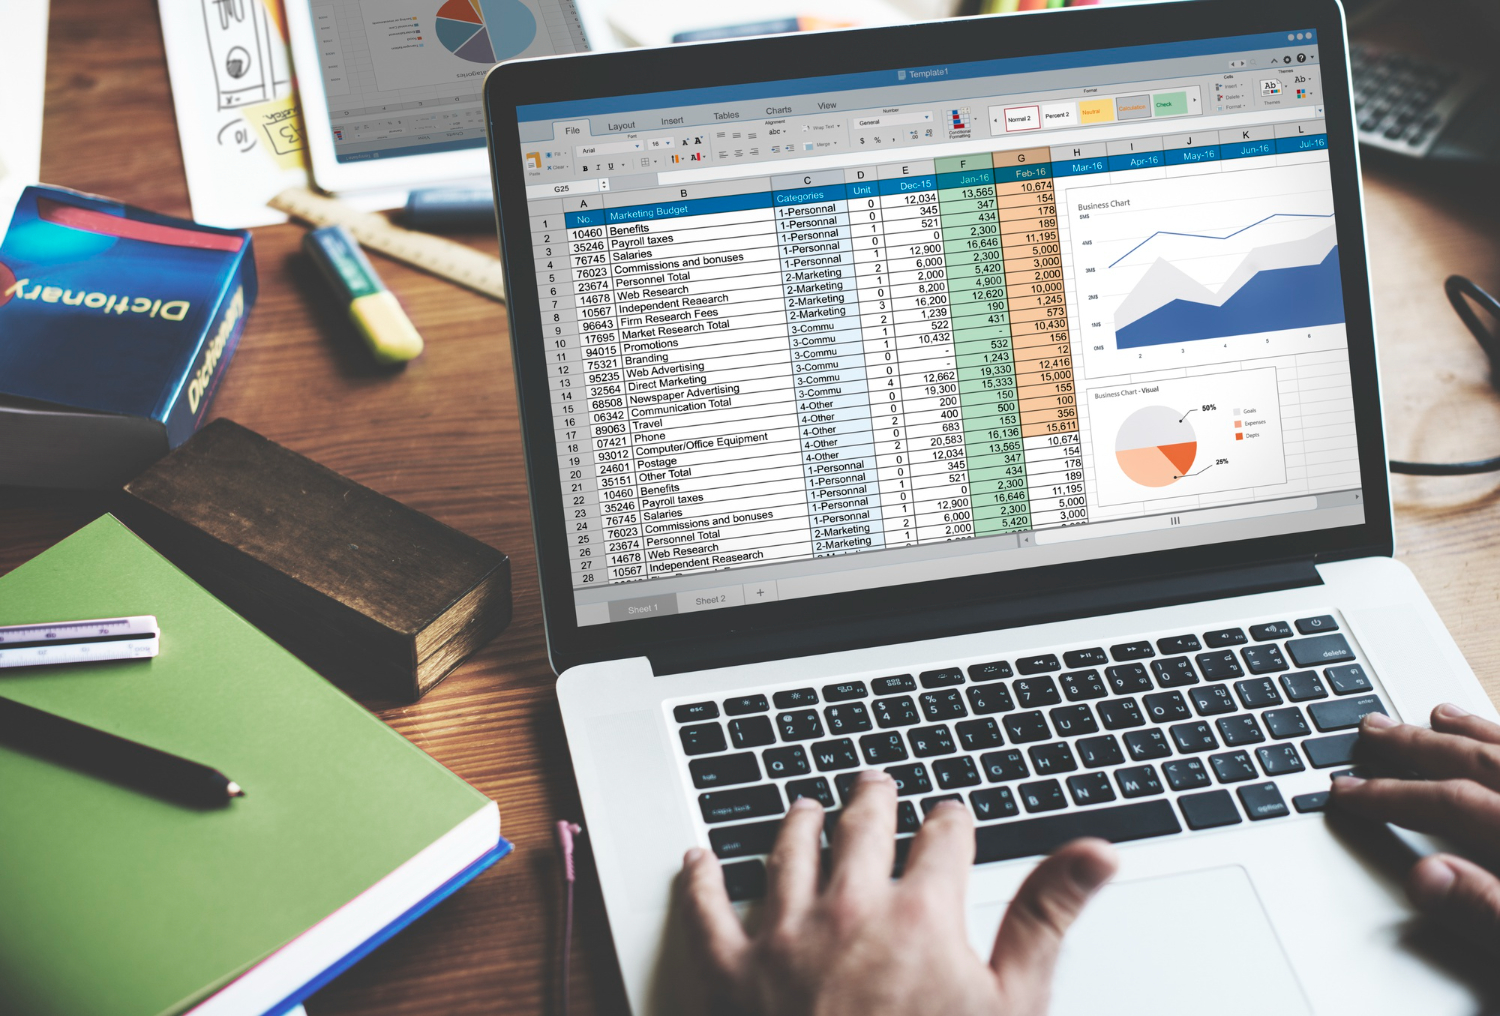 A step-by-step guide on using Excel to create a comprehensive business plan for your company.